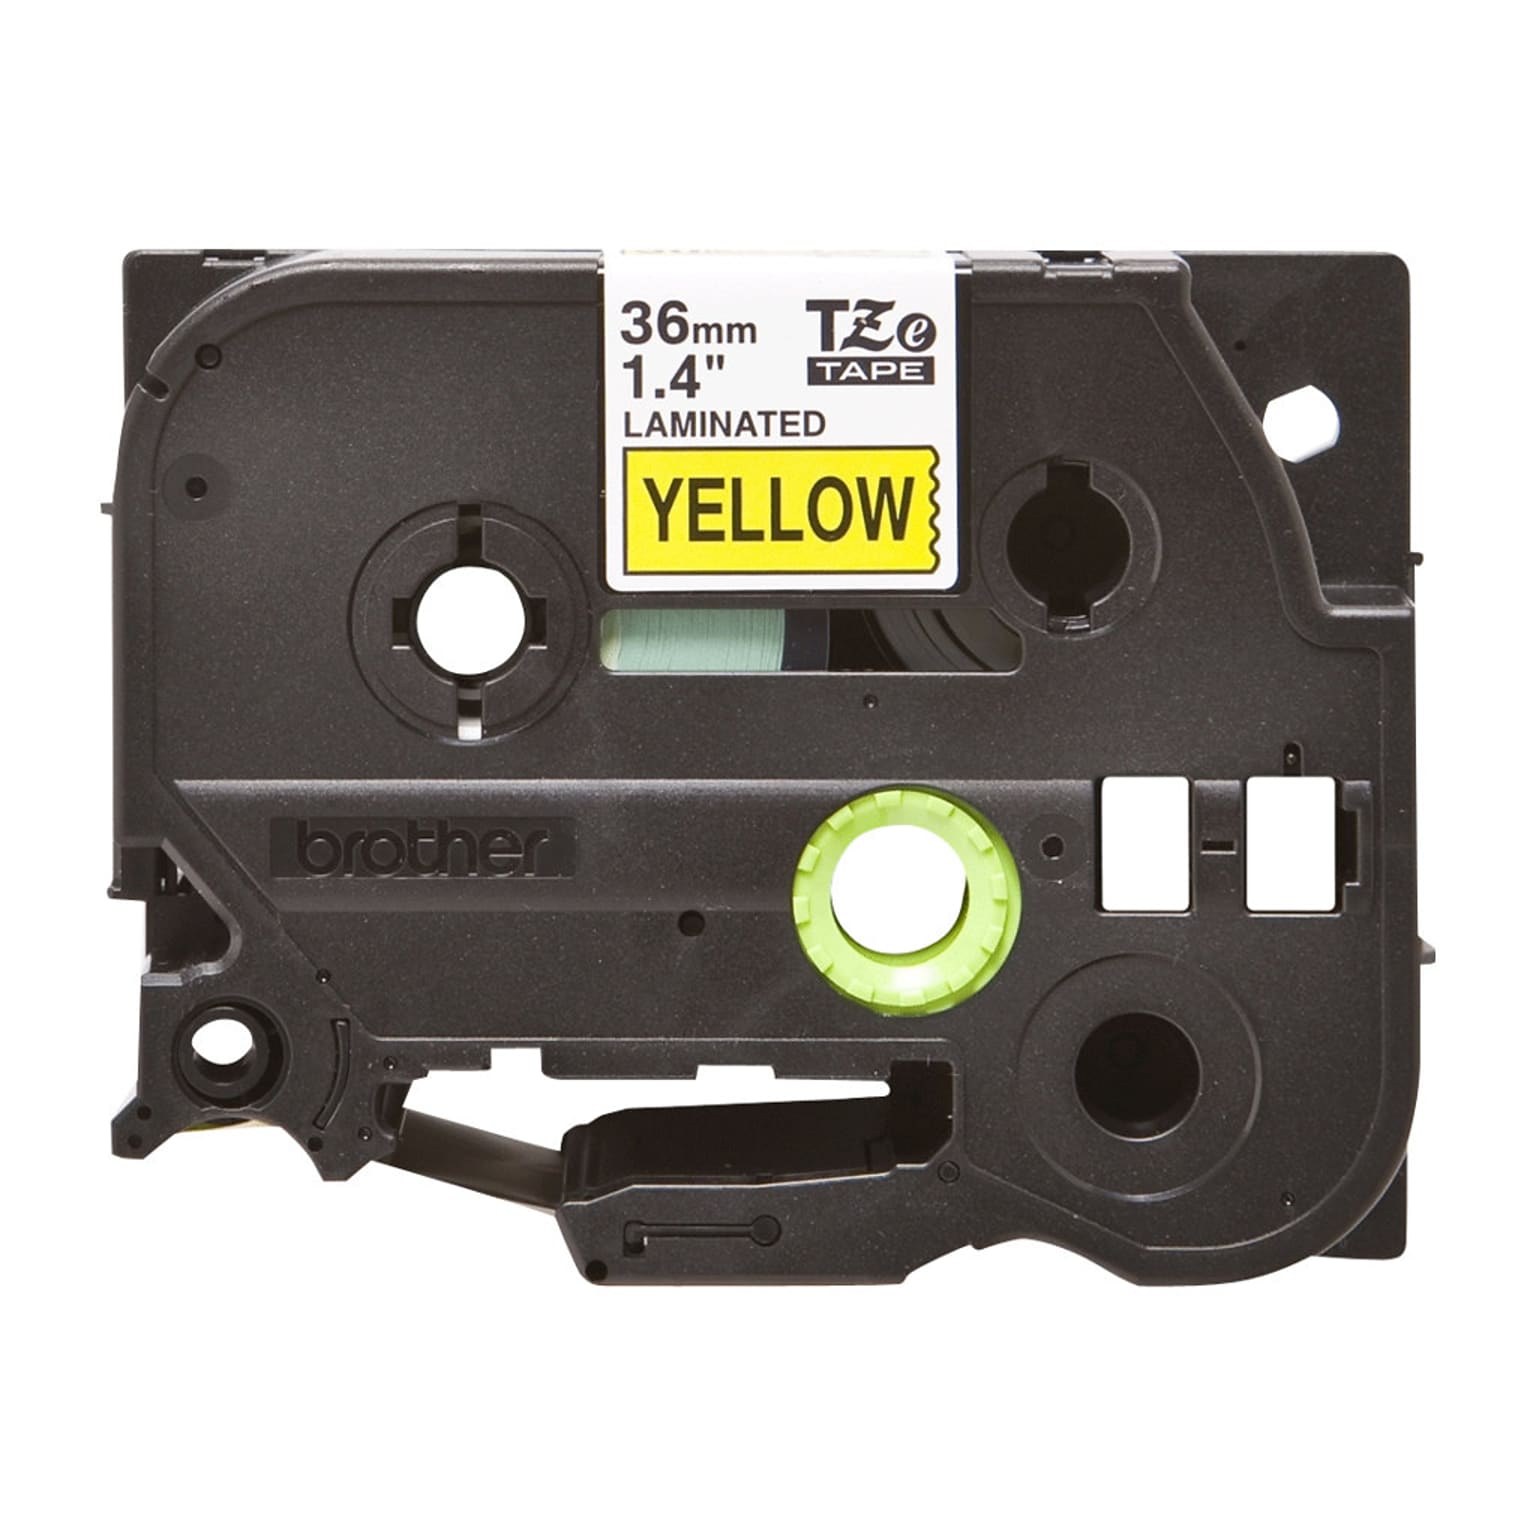 Brother P-touch TZe-661 Laminated Label Maker Tape, 1-1/2 x 26-2/10, Black On Yellow (TZe-661)